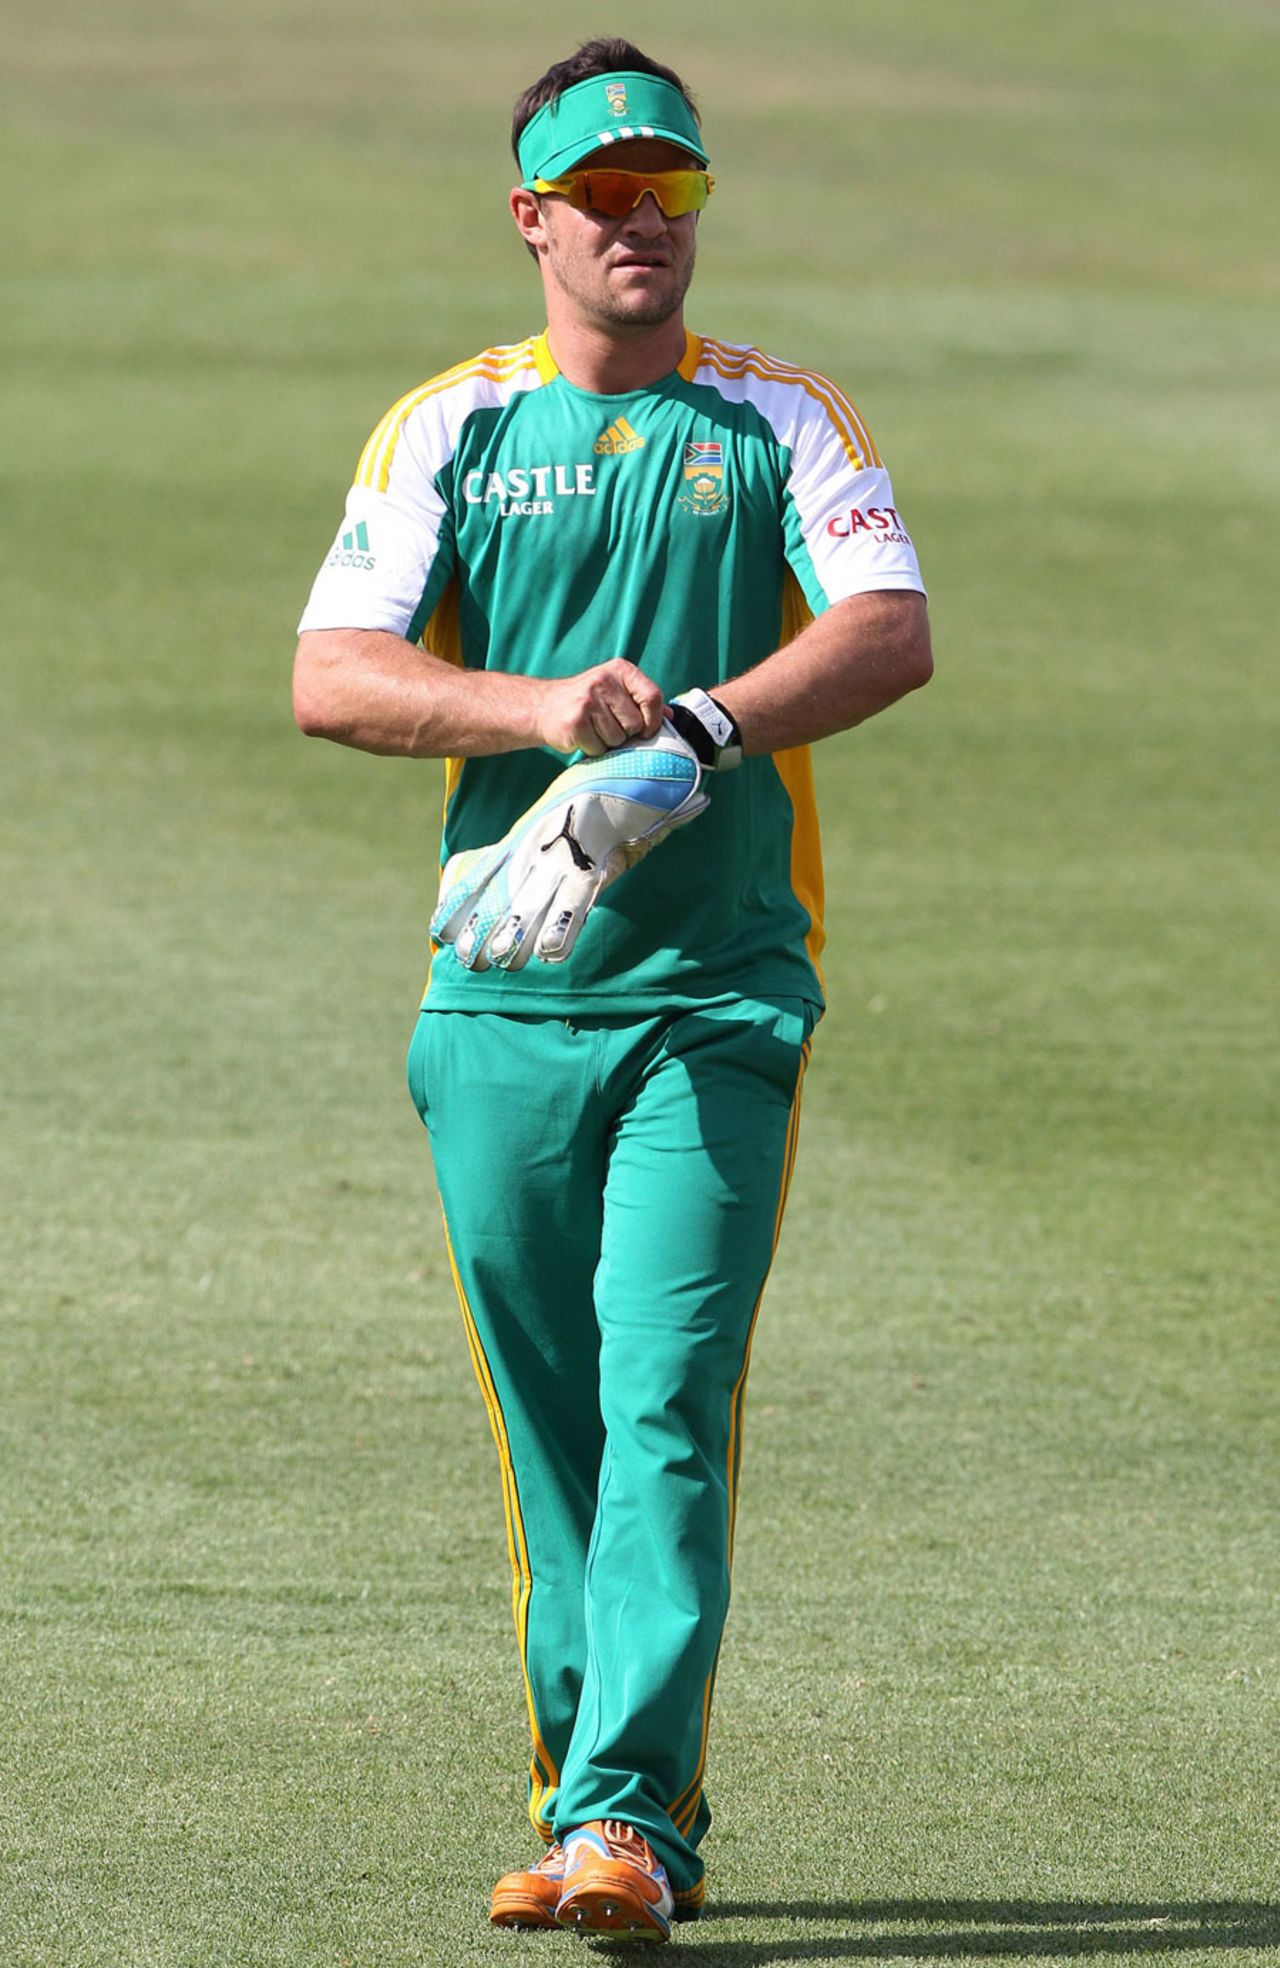 Heino Kuhn gets the wicketkeeping gloves on, Cape Town, October 10, 2011